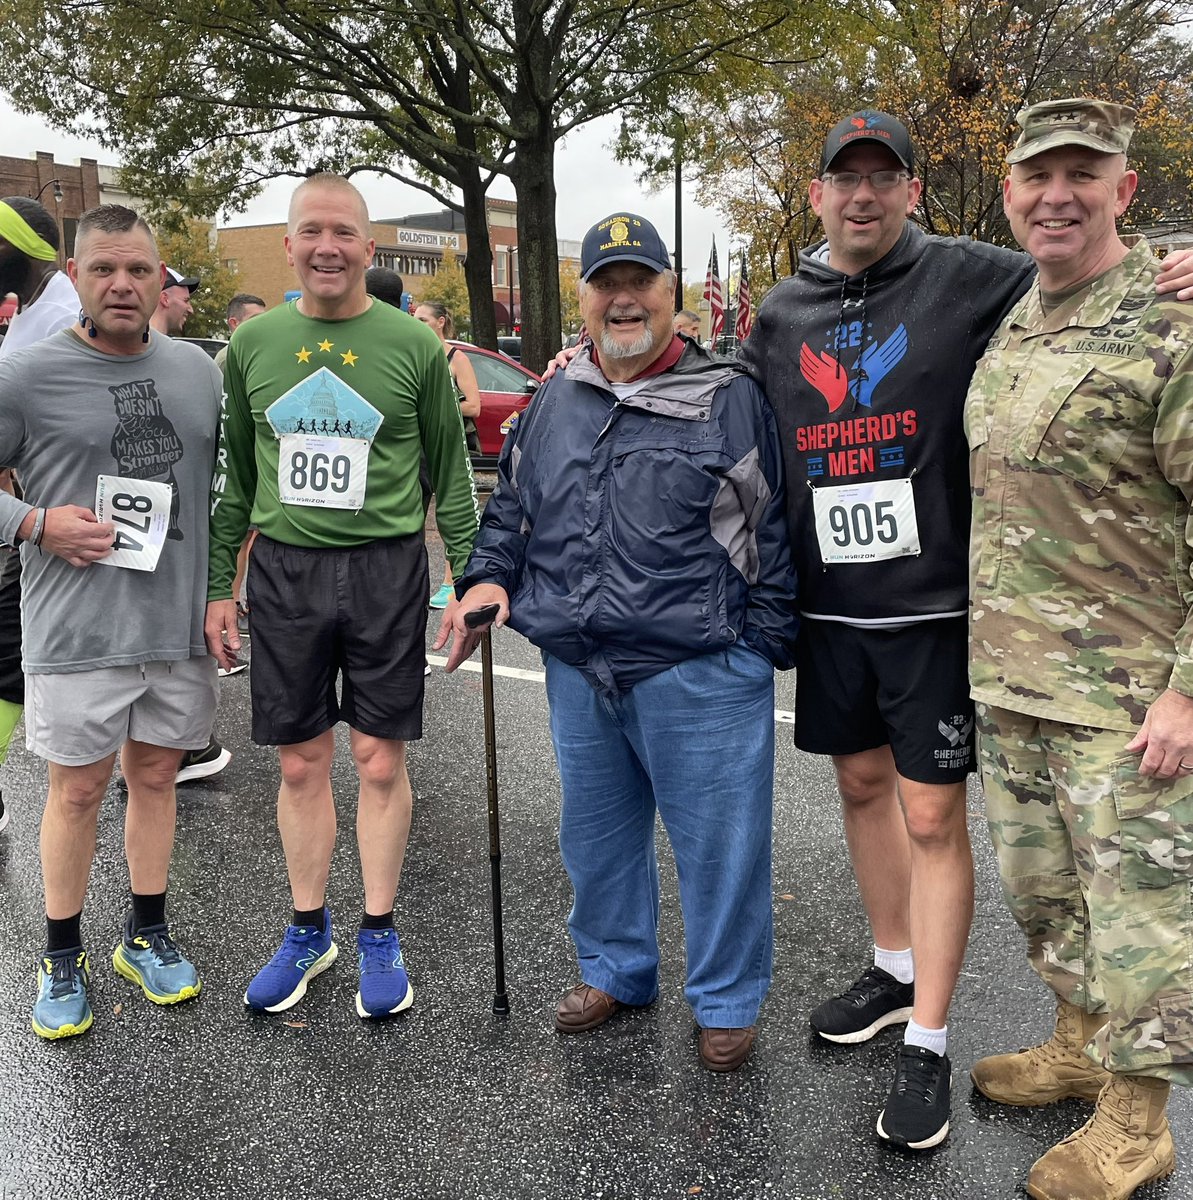 Thanks to American Legion Post 29 for hosting the 9th Annual Veterans Memorial 5K earlier today. This event brings the community together to honor all of our veterans! Happy Veterans Day! #SharedPurpose #SharedValues #SharedVictory